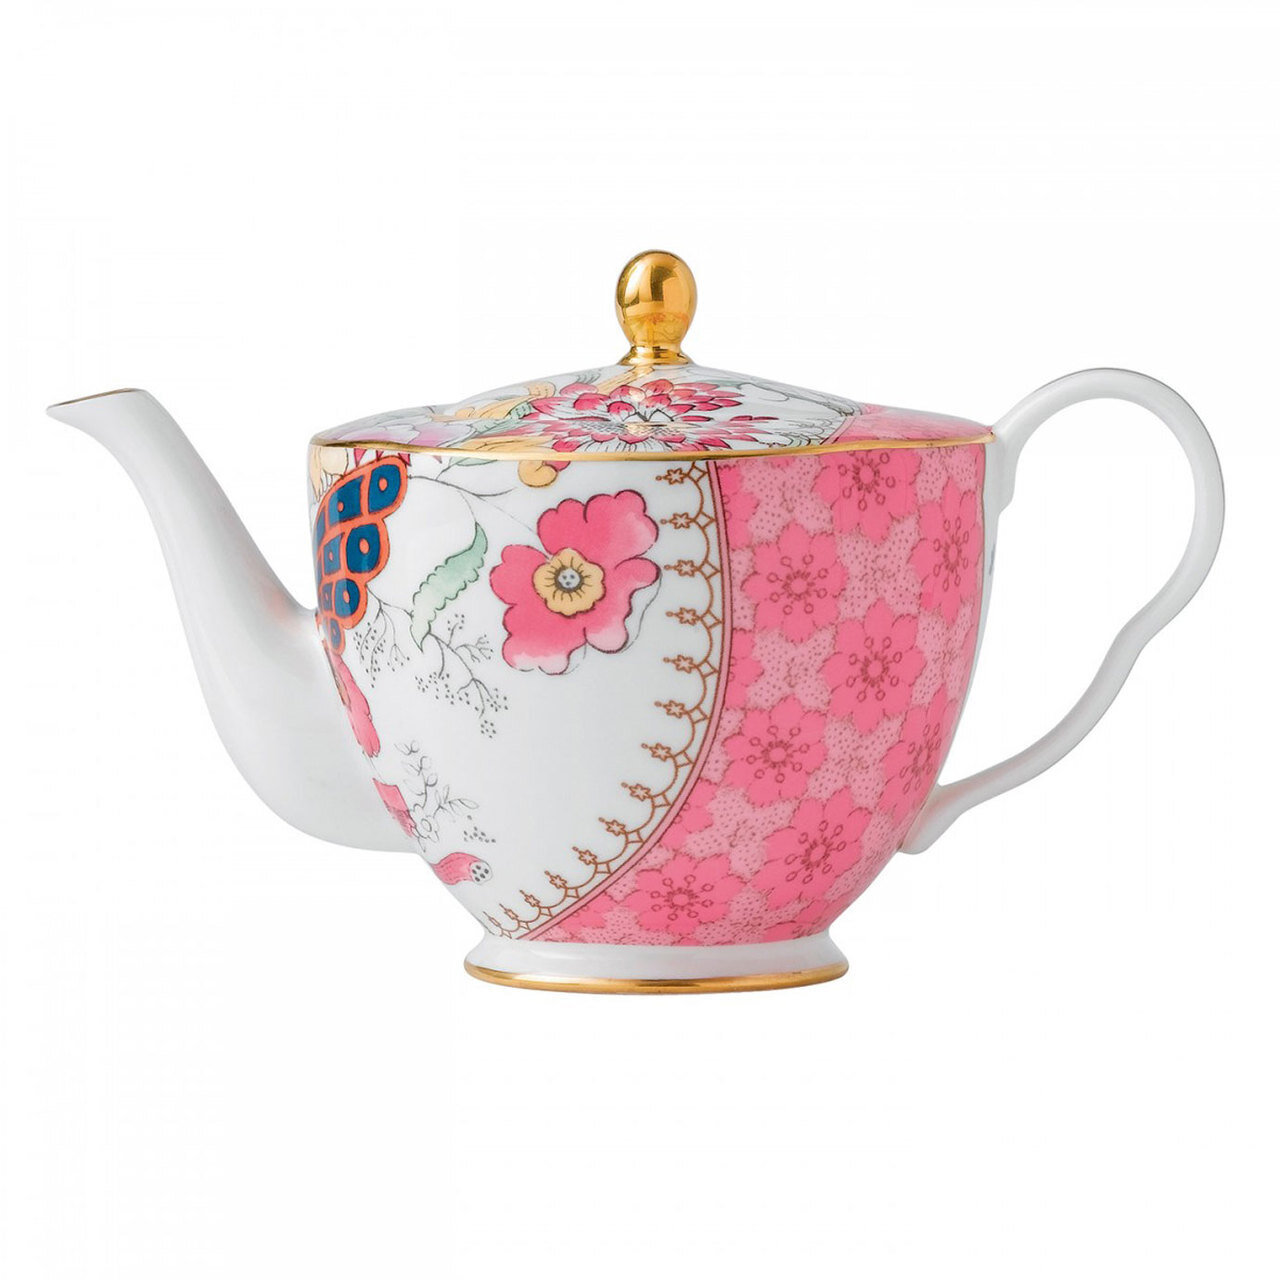 Wedgwood Butterfly Bloom Teapot S/S 12.5 Oz